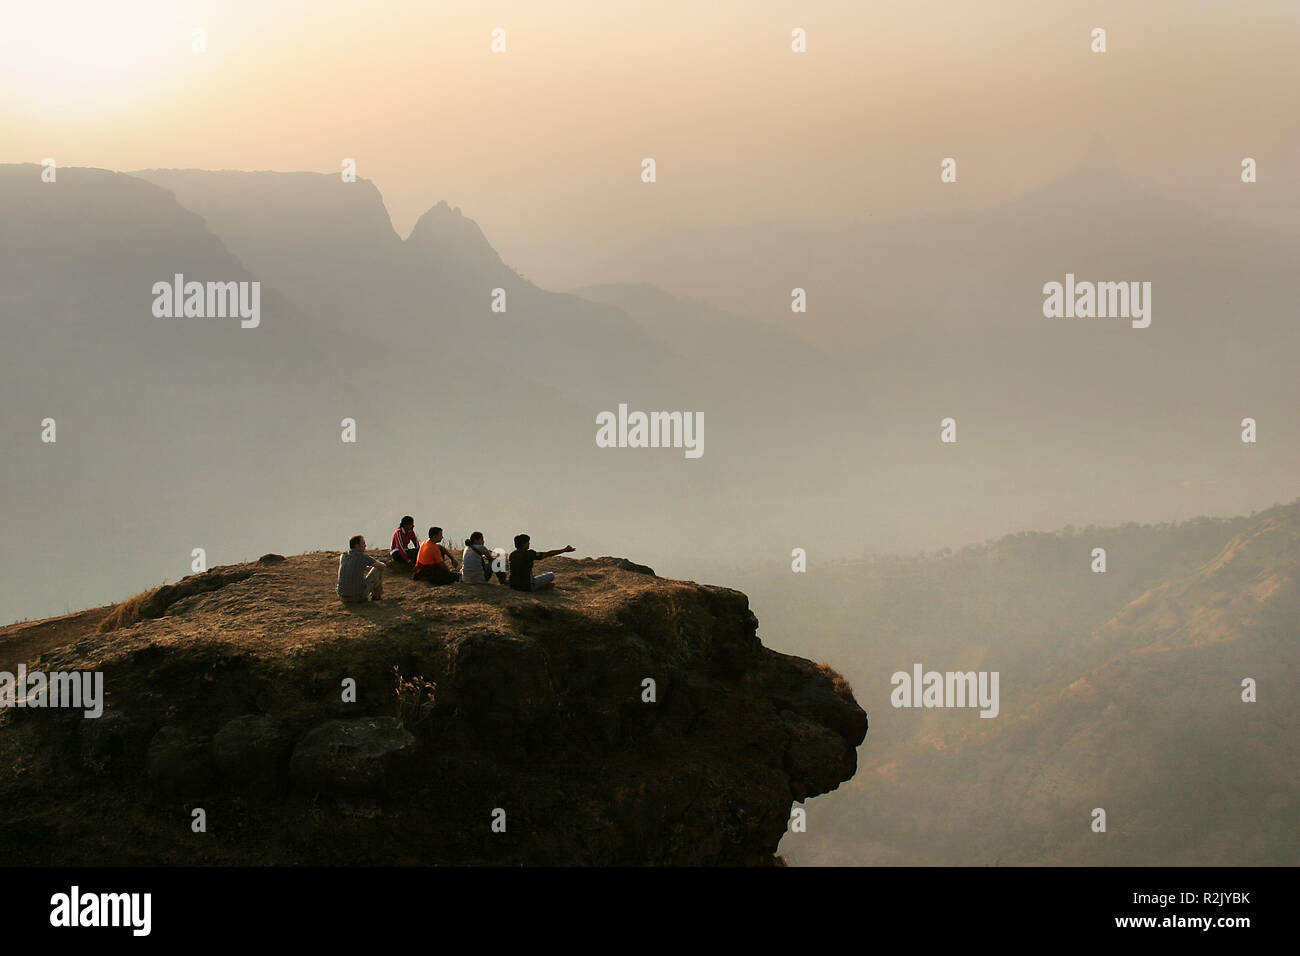 group of people sitting in front of mountain landscape Stock Photo